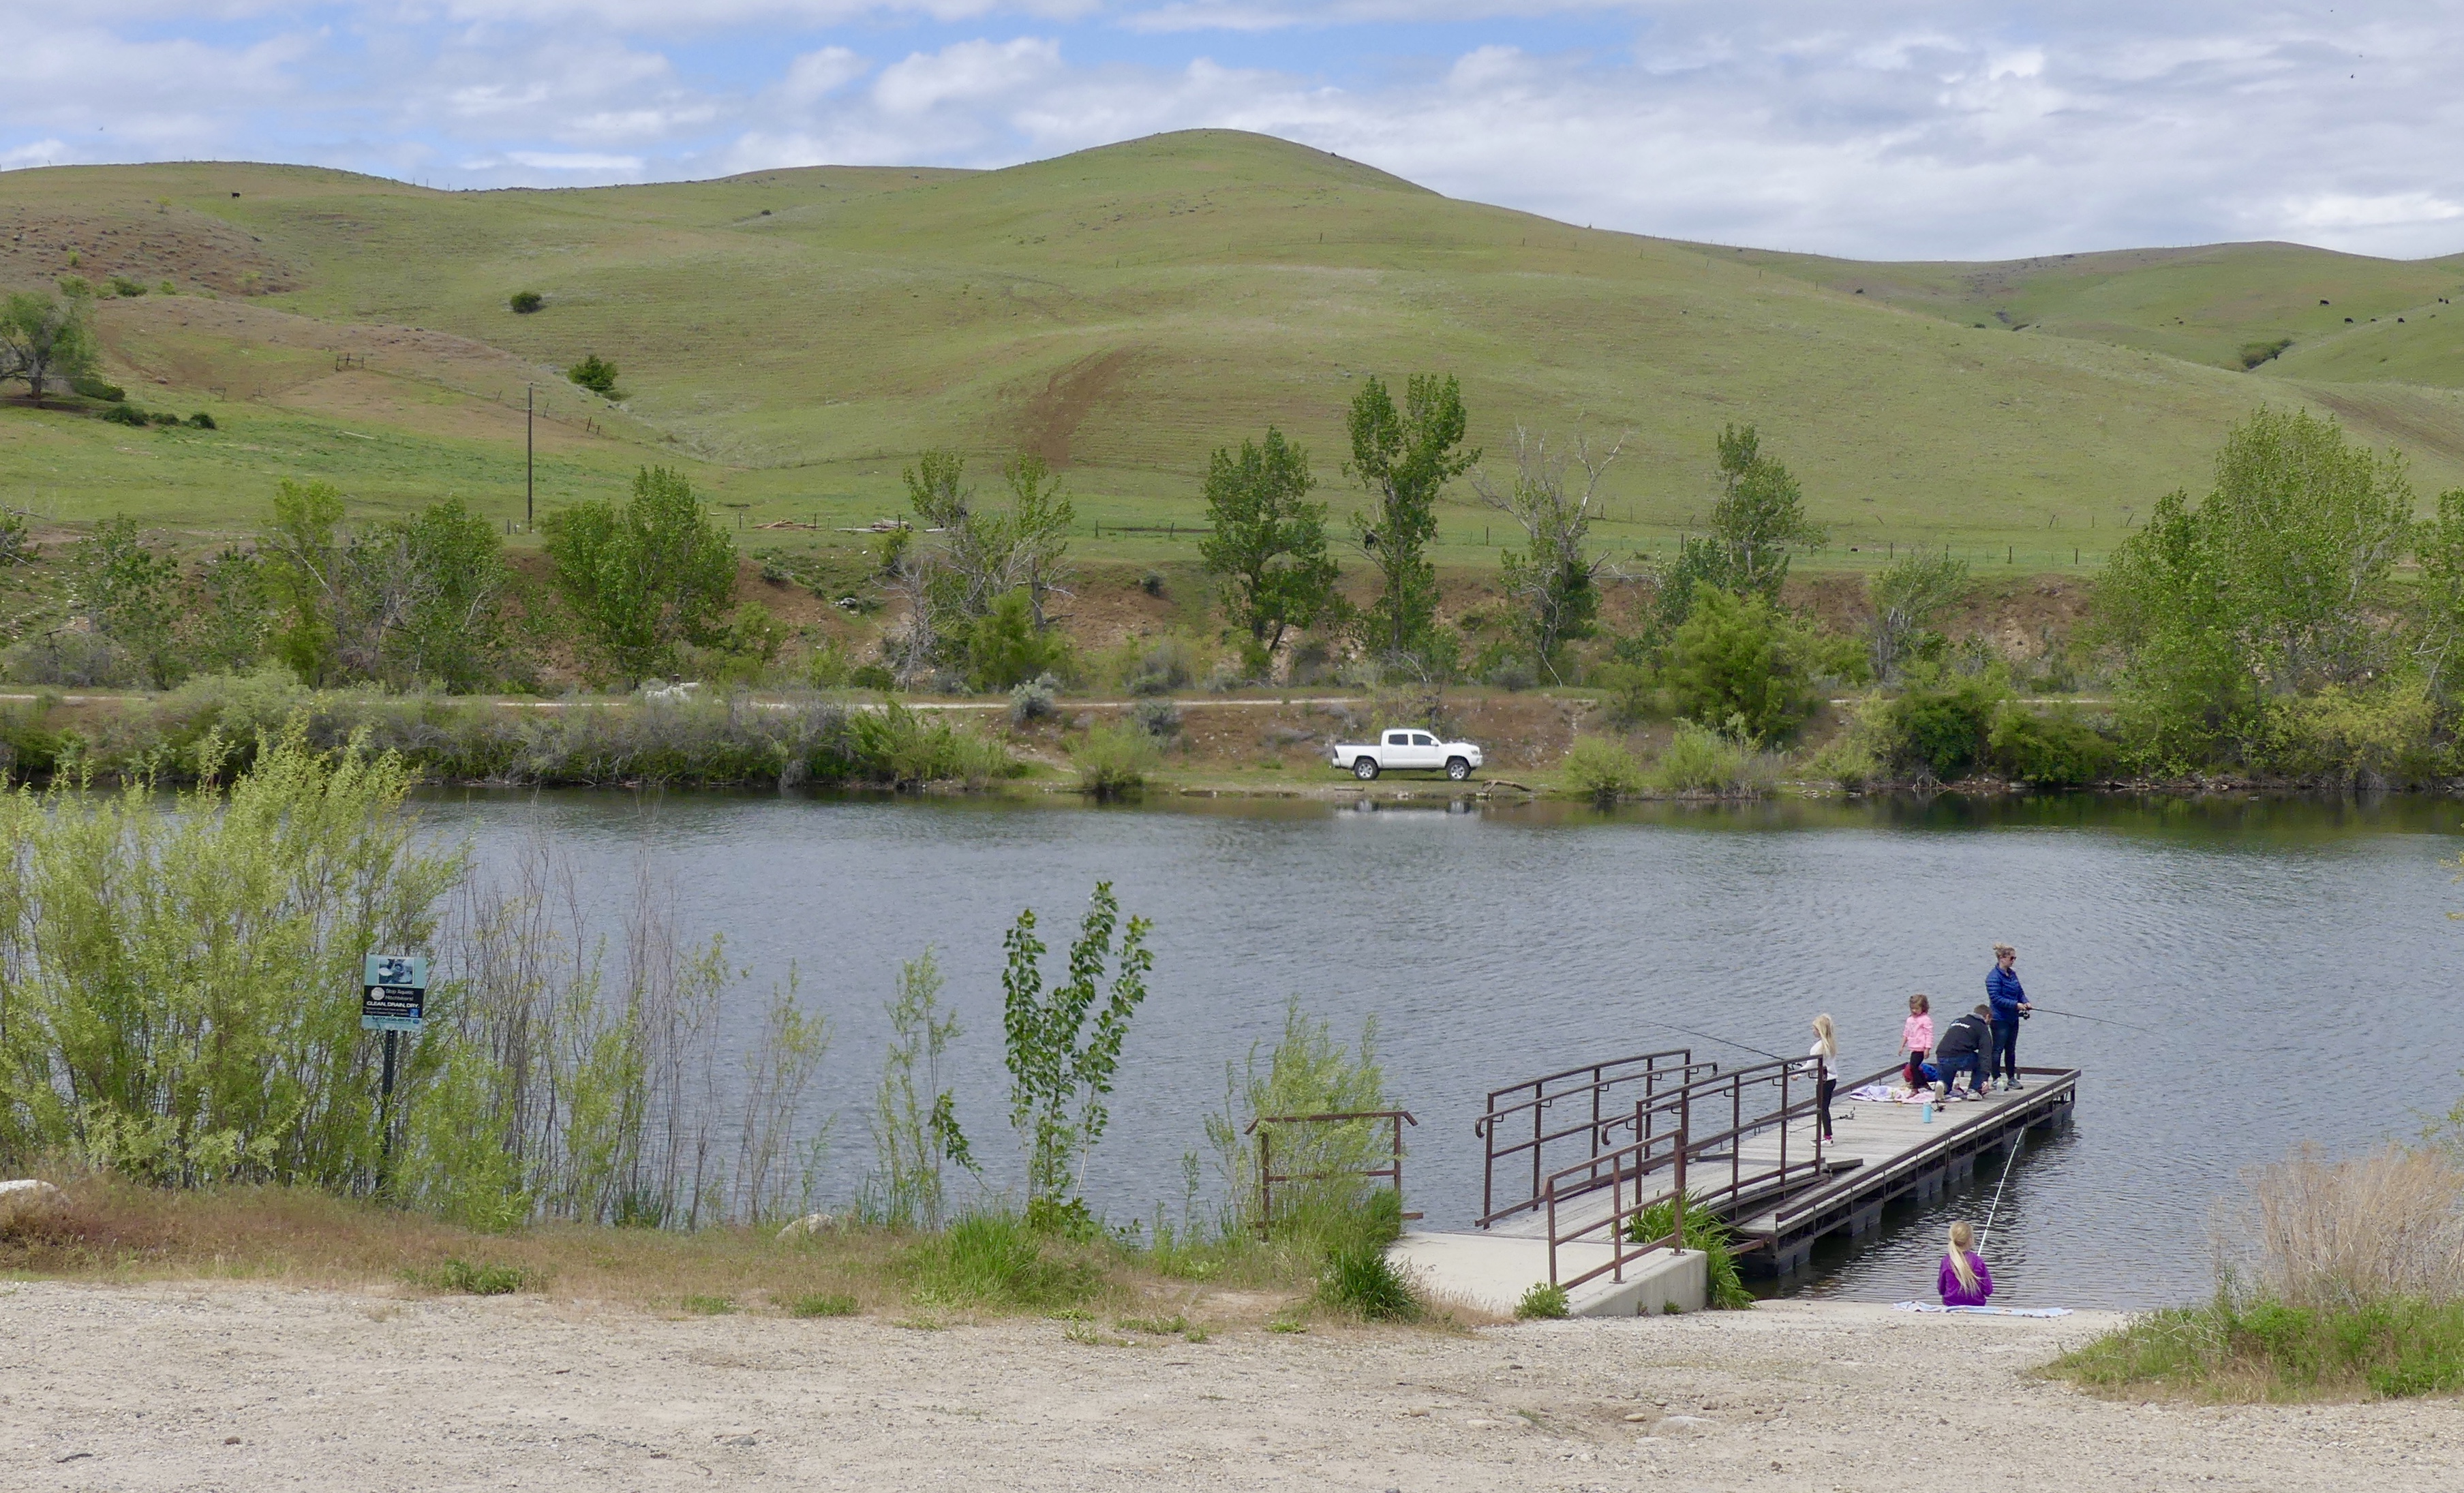 No matter where you live in Idaho, Free Fishing Day on June 10